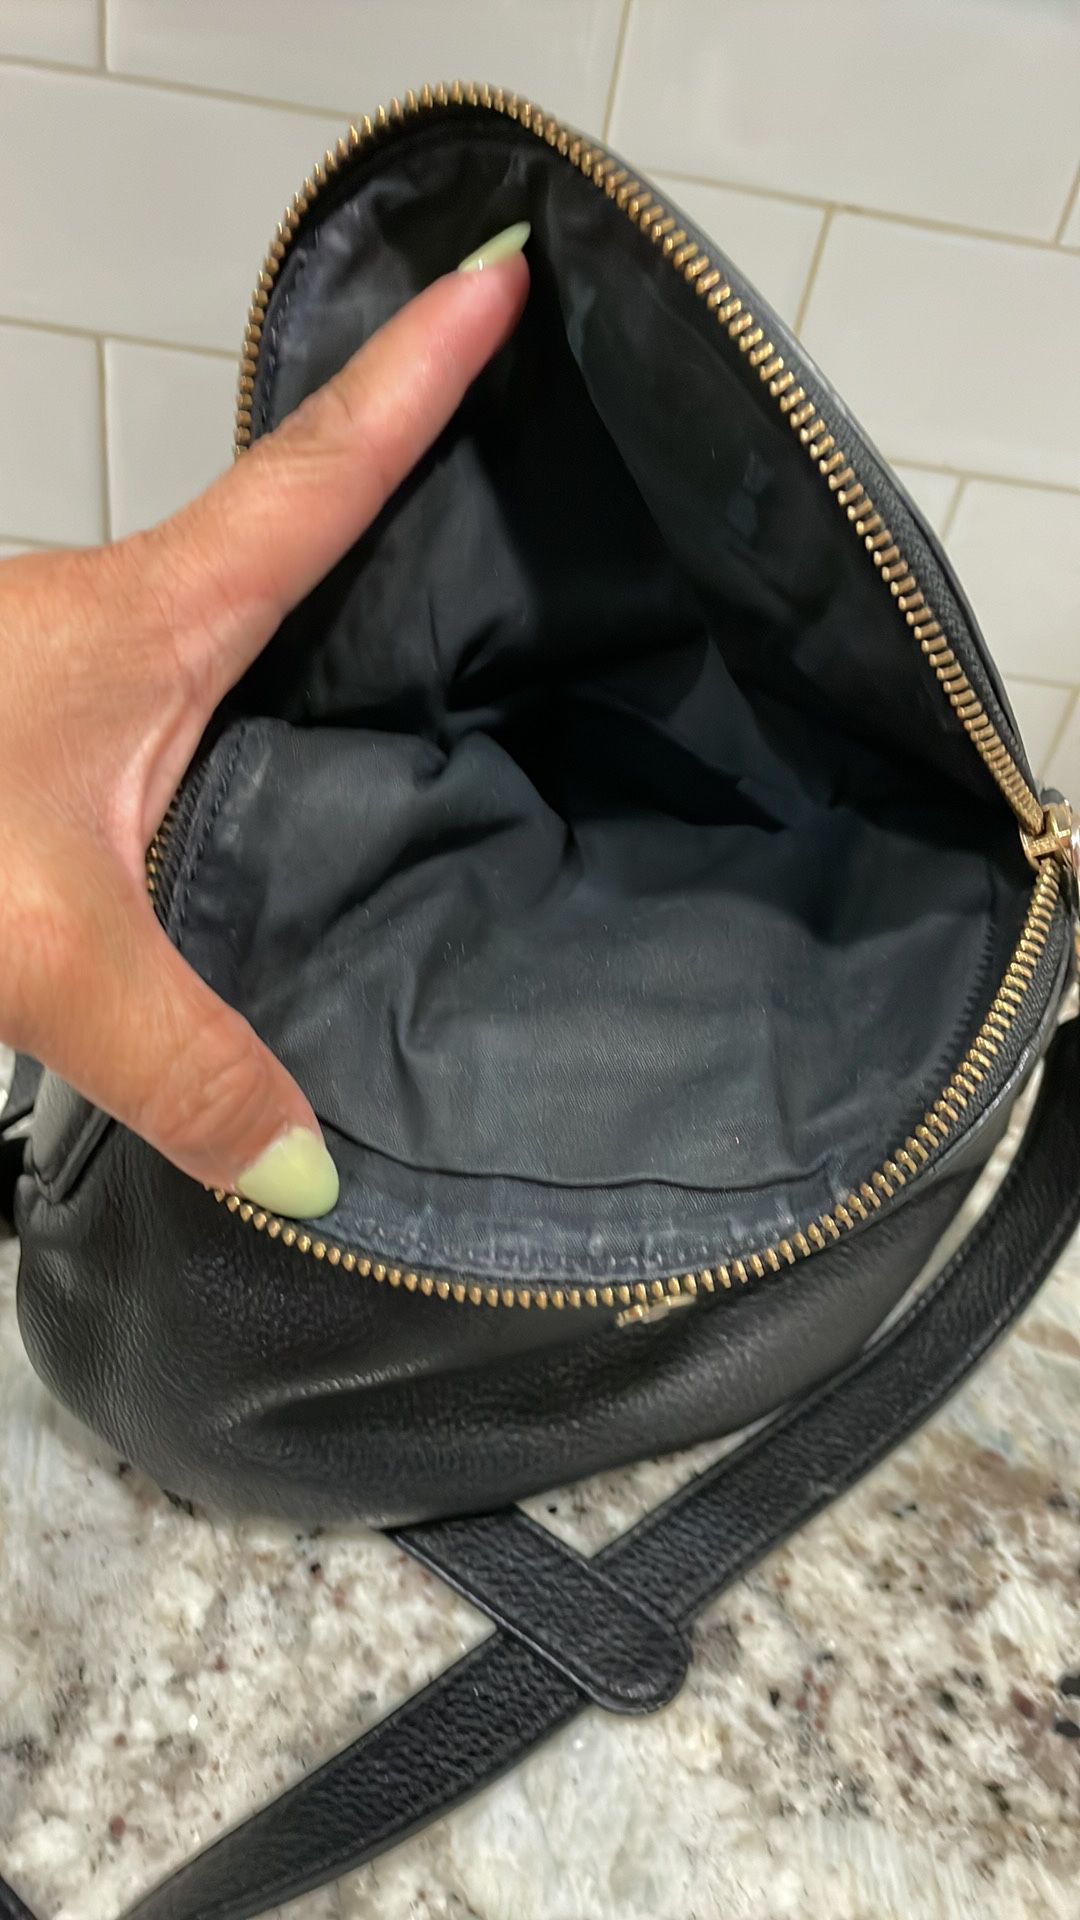 Marc Jacobs Black Leather Crossbody Bag for Sale in Santa Ana, CA - OfferUp